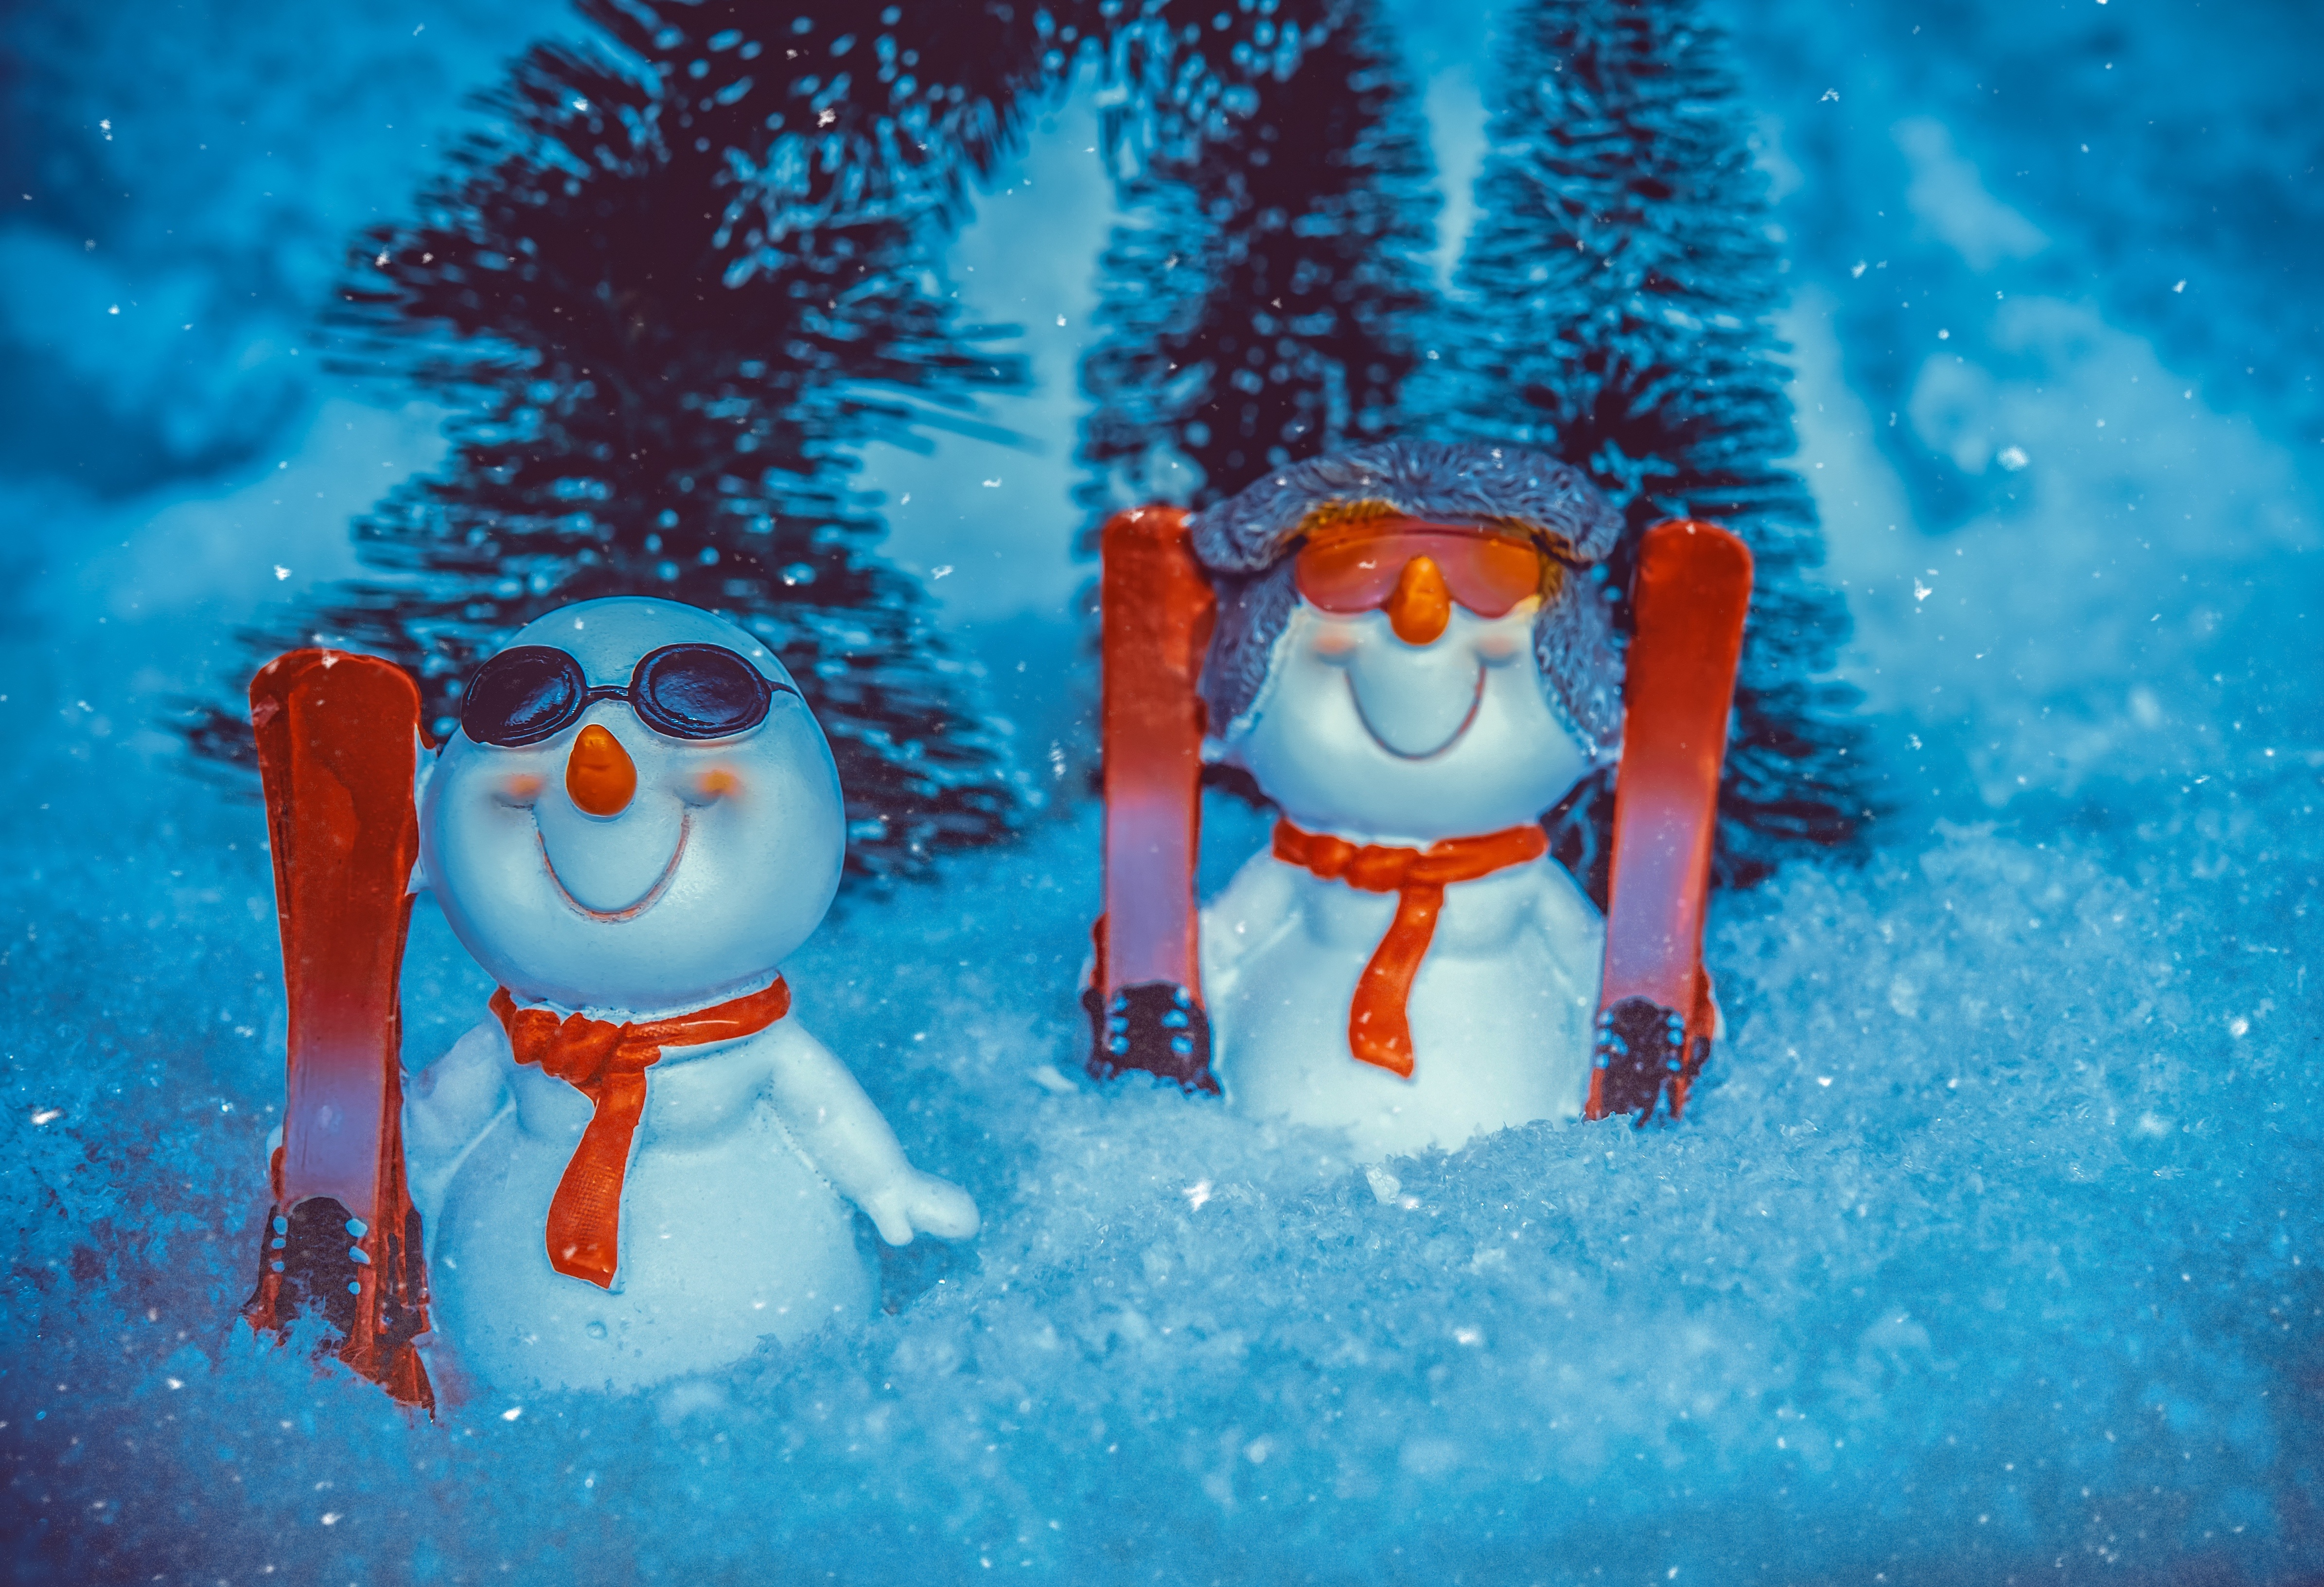 119164 download wallpaper holidays, new year, snow, snowman, christmas, toy, statuette screensavers and pictures for free